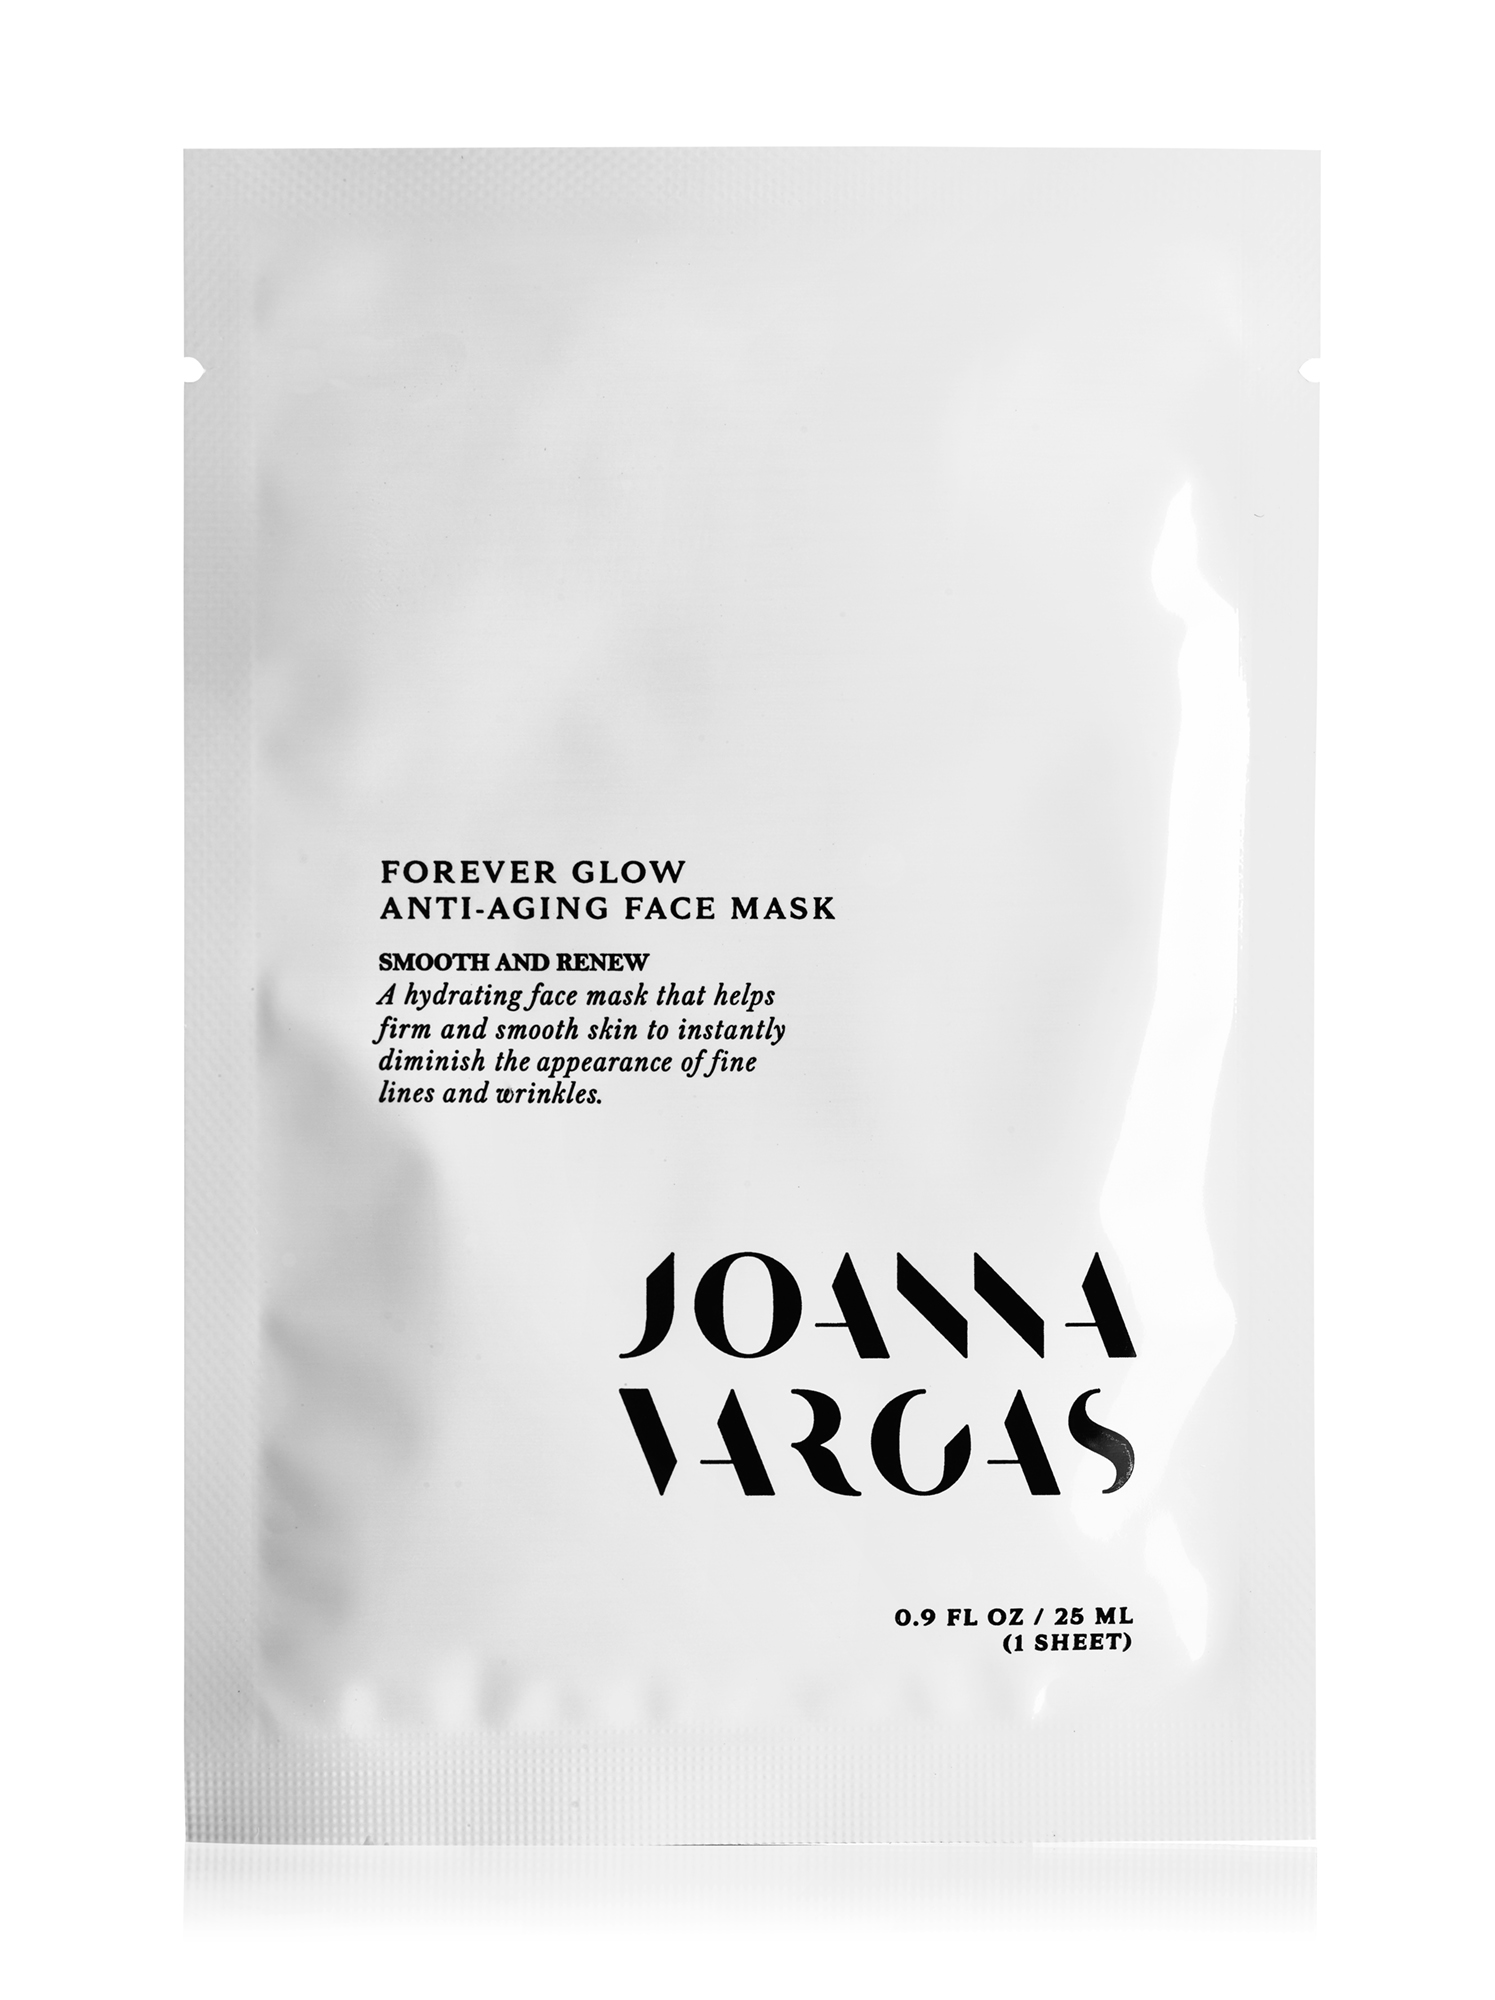 Joanna Vargas Forever Glow Anti-Aging Face Mask